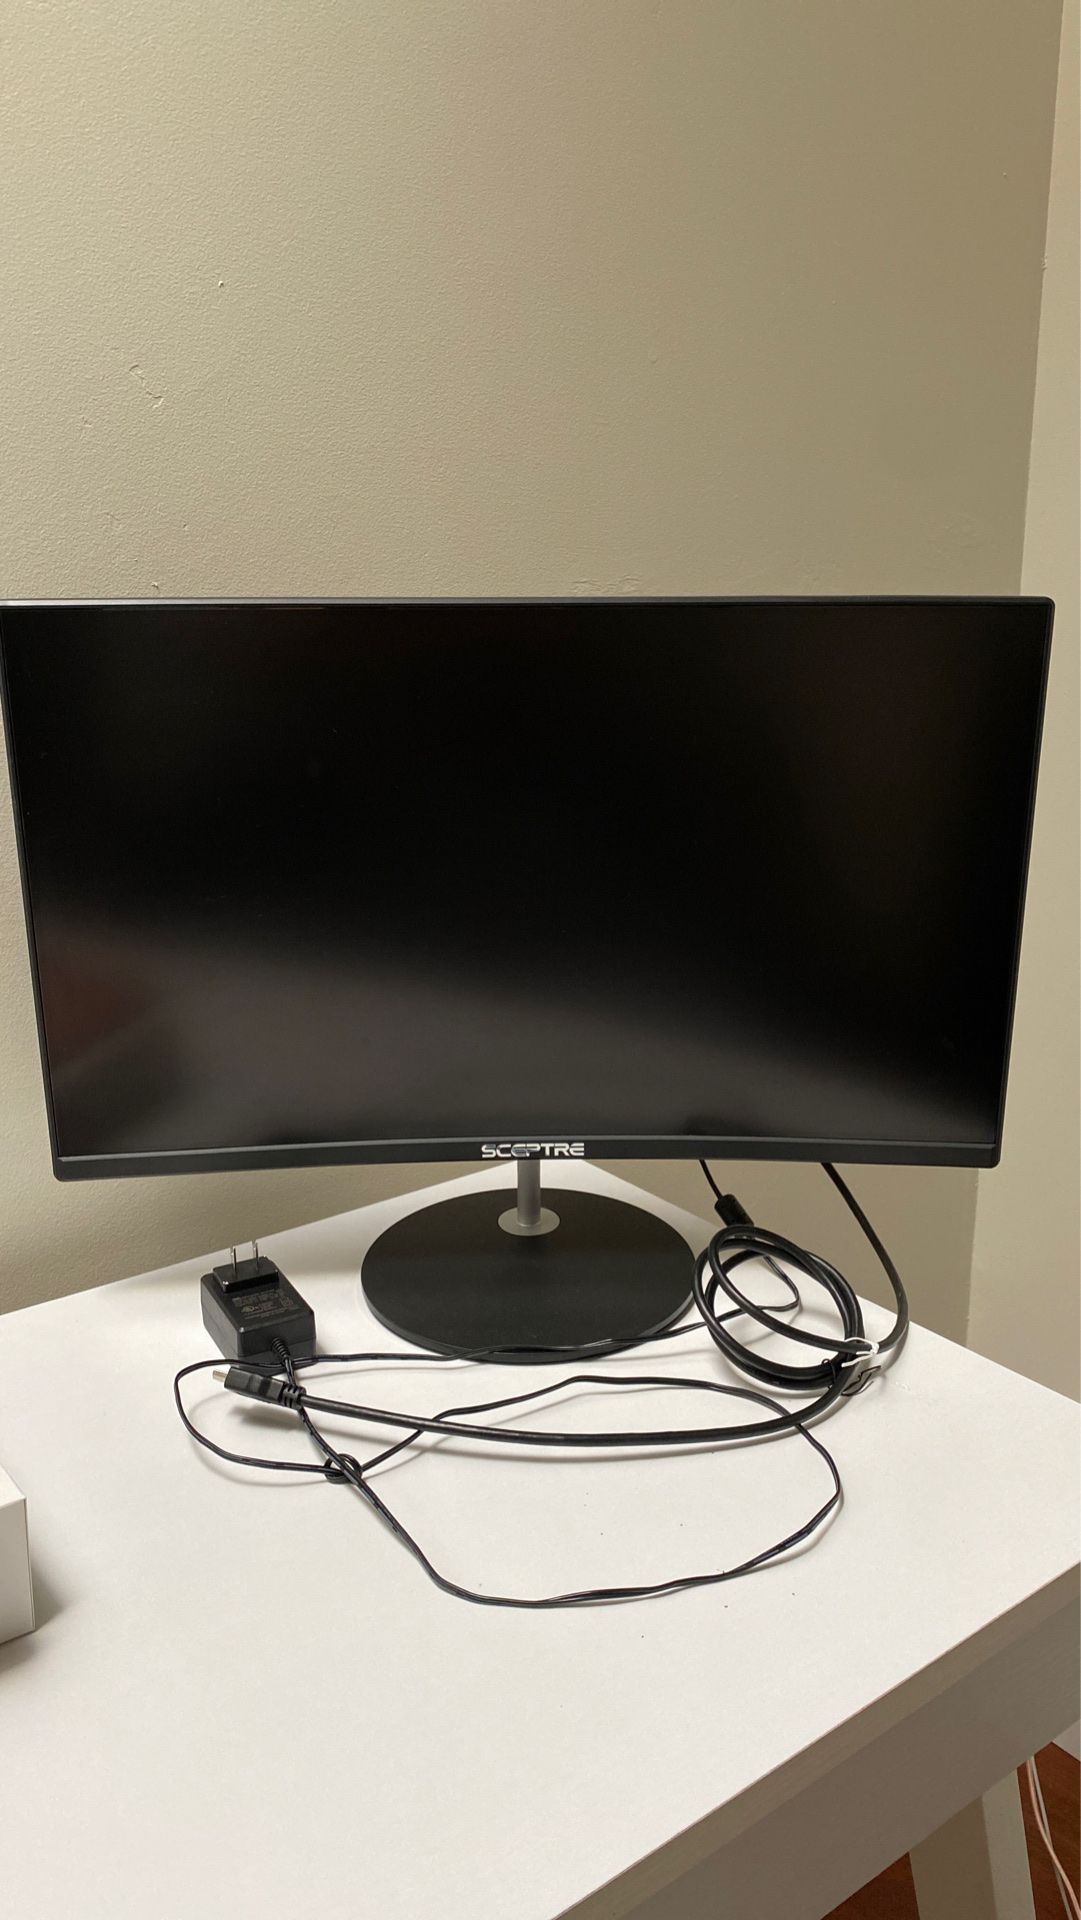 Sceptre Monitor - Work from Home Office Equipment